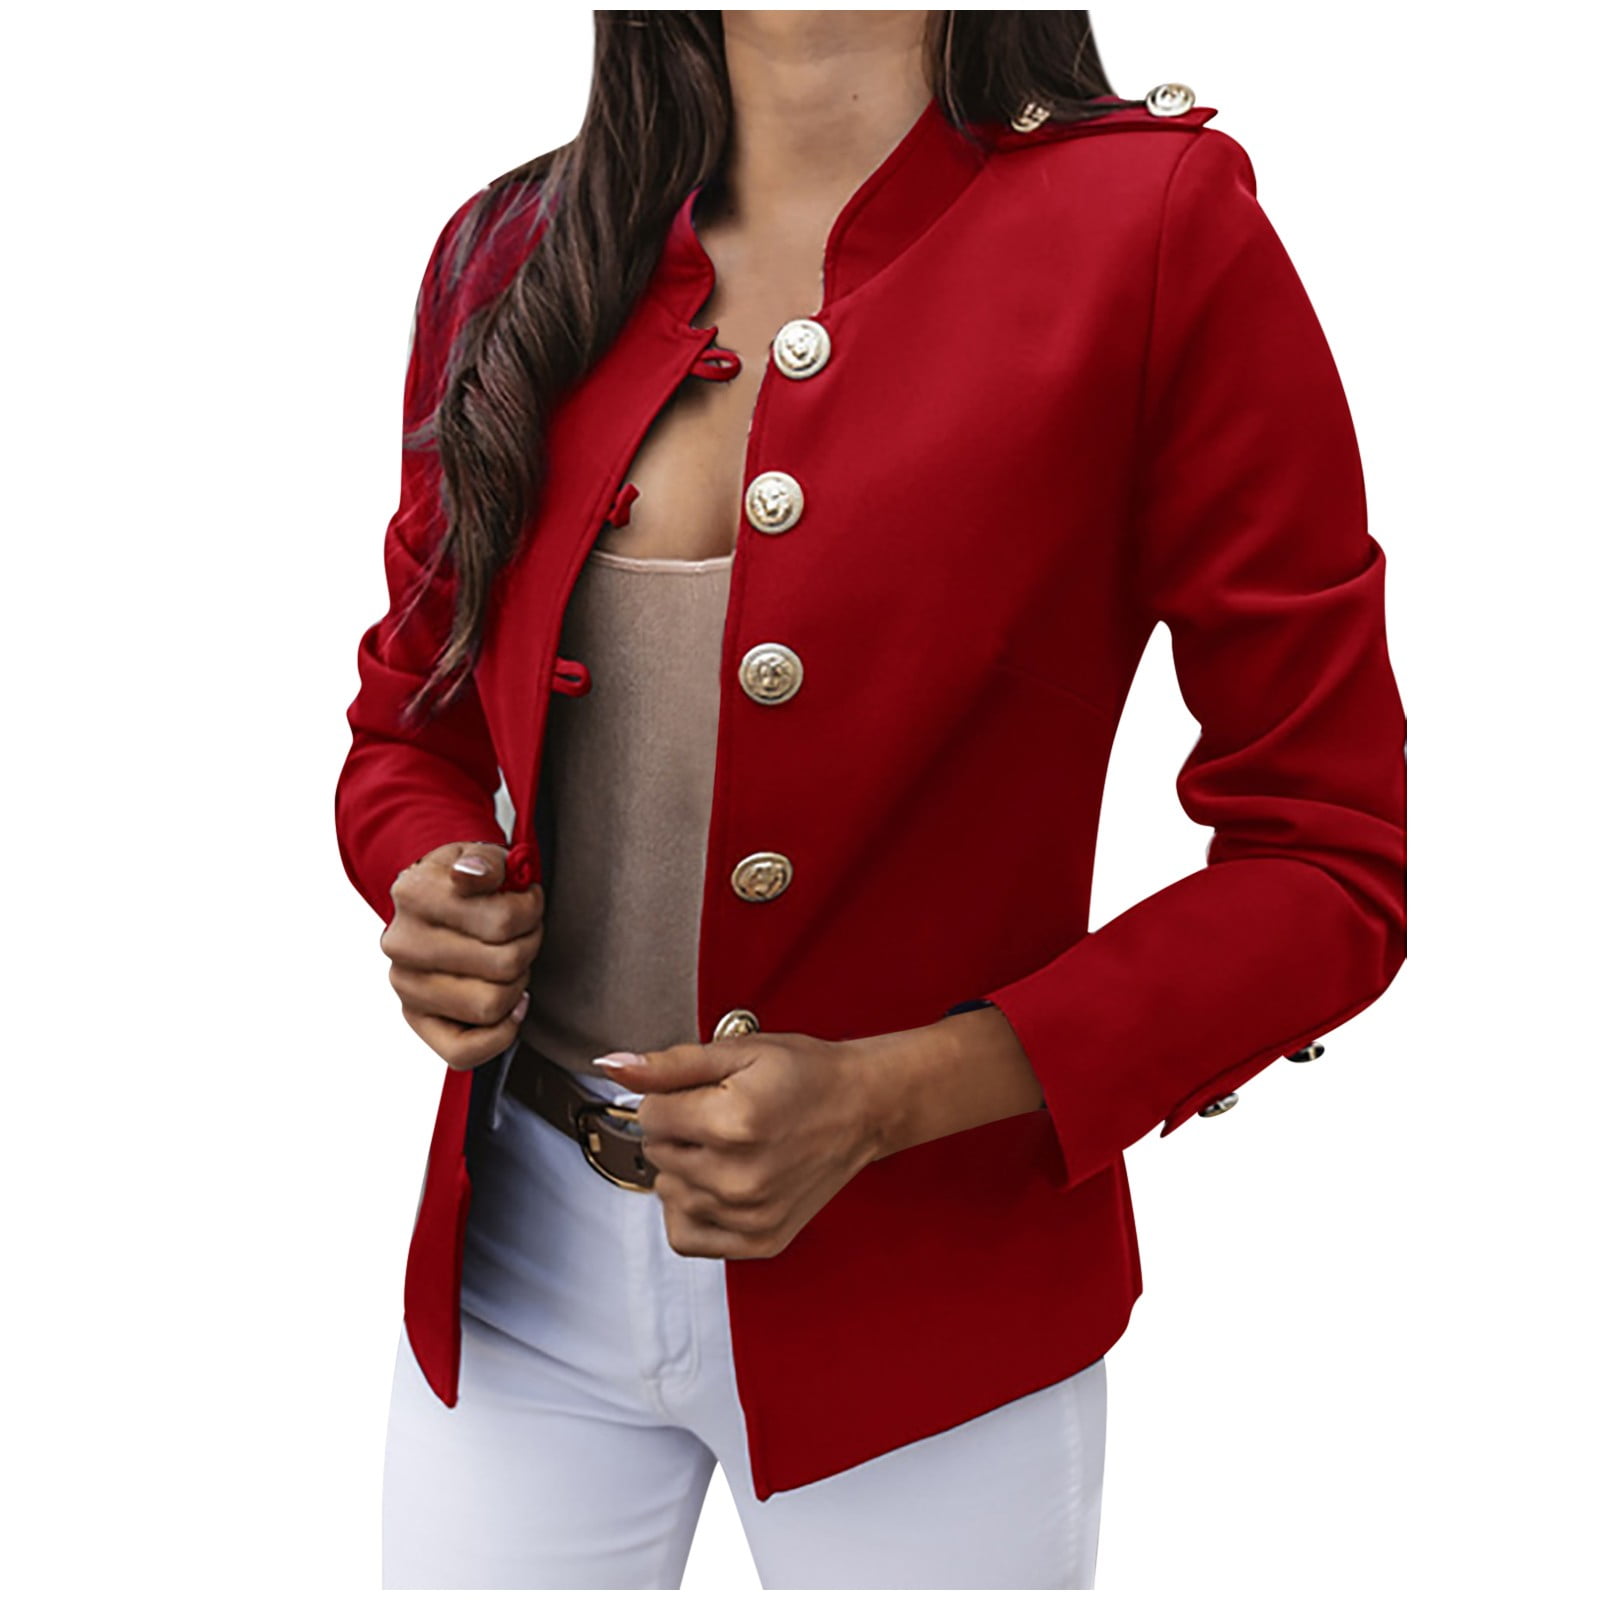  My Orders, Winter Clothes for Women Single Breasted Blazer  Women Split Collar Court Suit Jackets with Pockets Womens Jackets Prime  Clearance Items Womens Coats Winter Clearance Prime : Sports & Outdoors